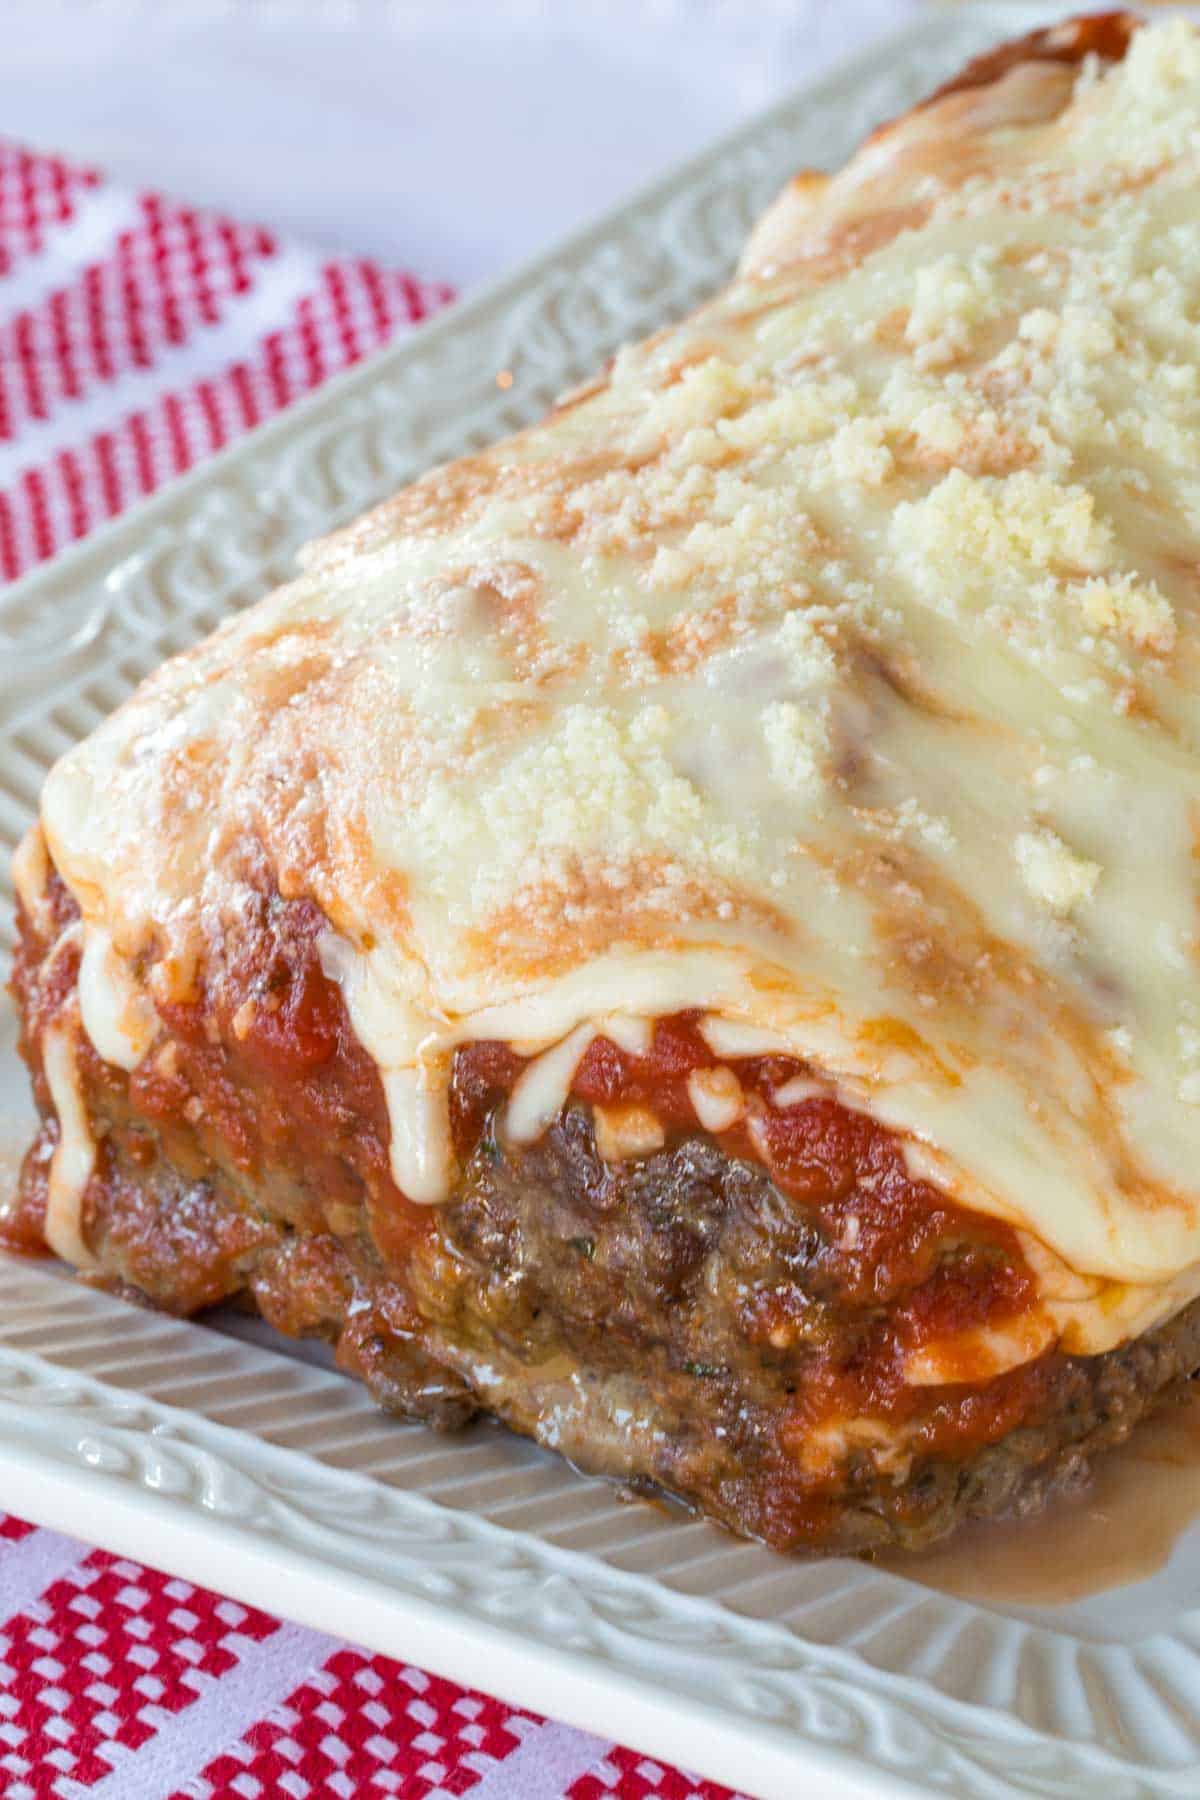 A fully baked mozzarella stuffed meatloaf on top of a fancy serving platter